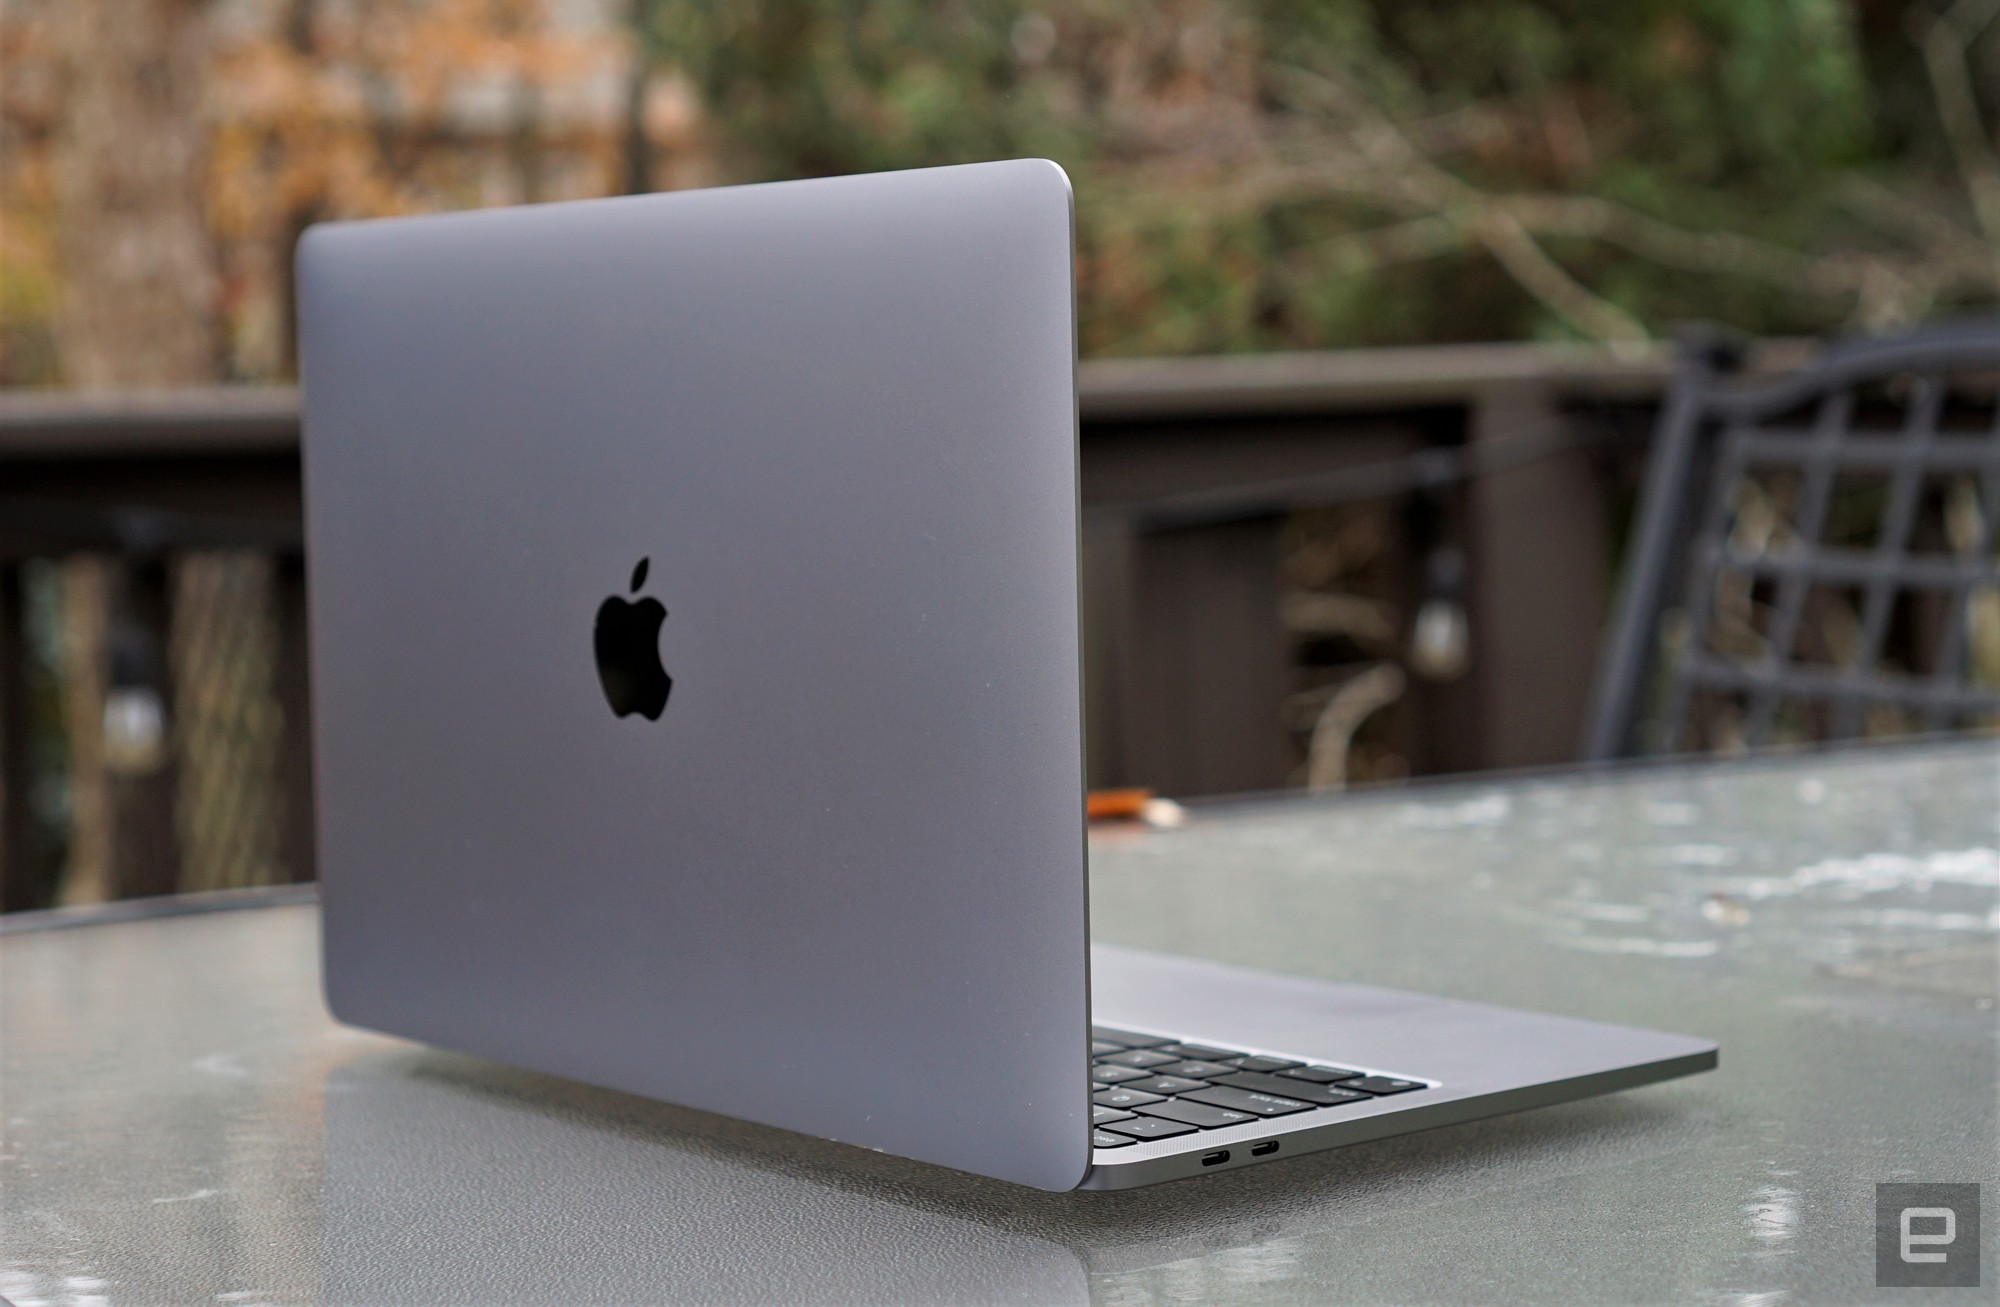 Apple MacBook Pro M1 review (13-inch, 2020) | Engadget